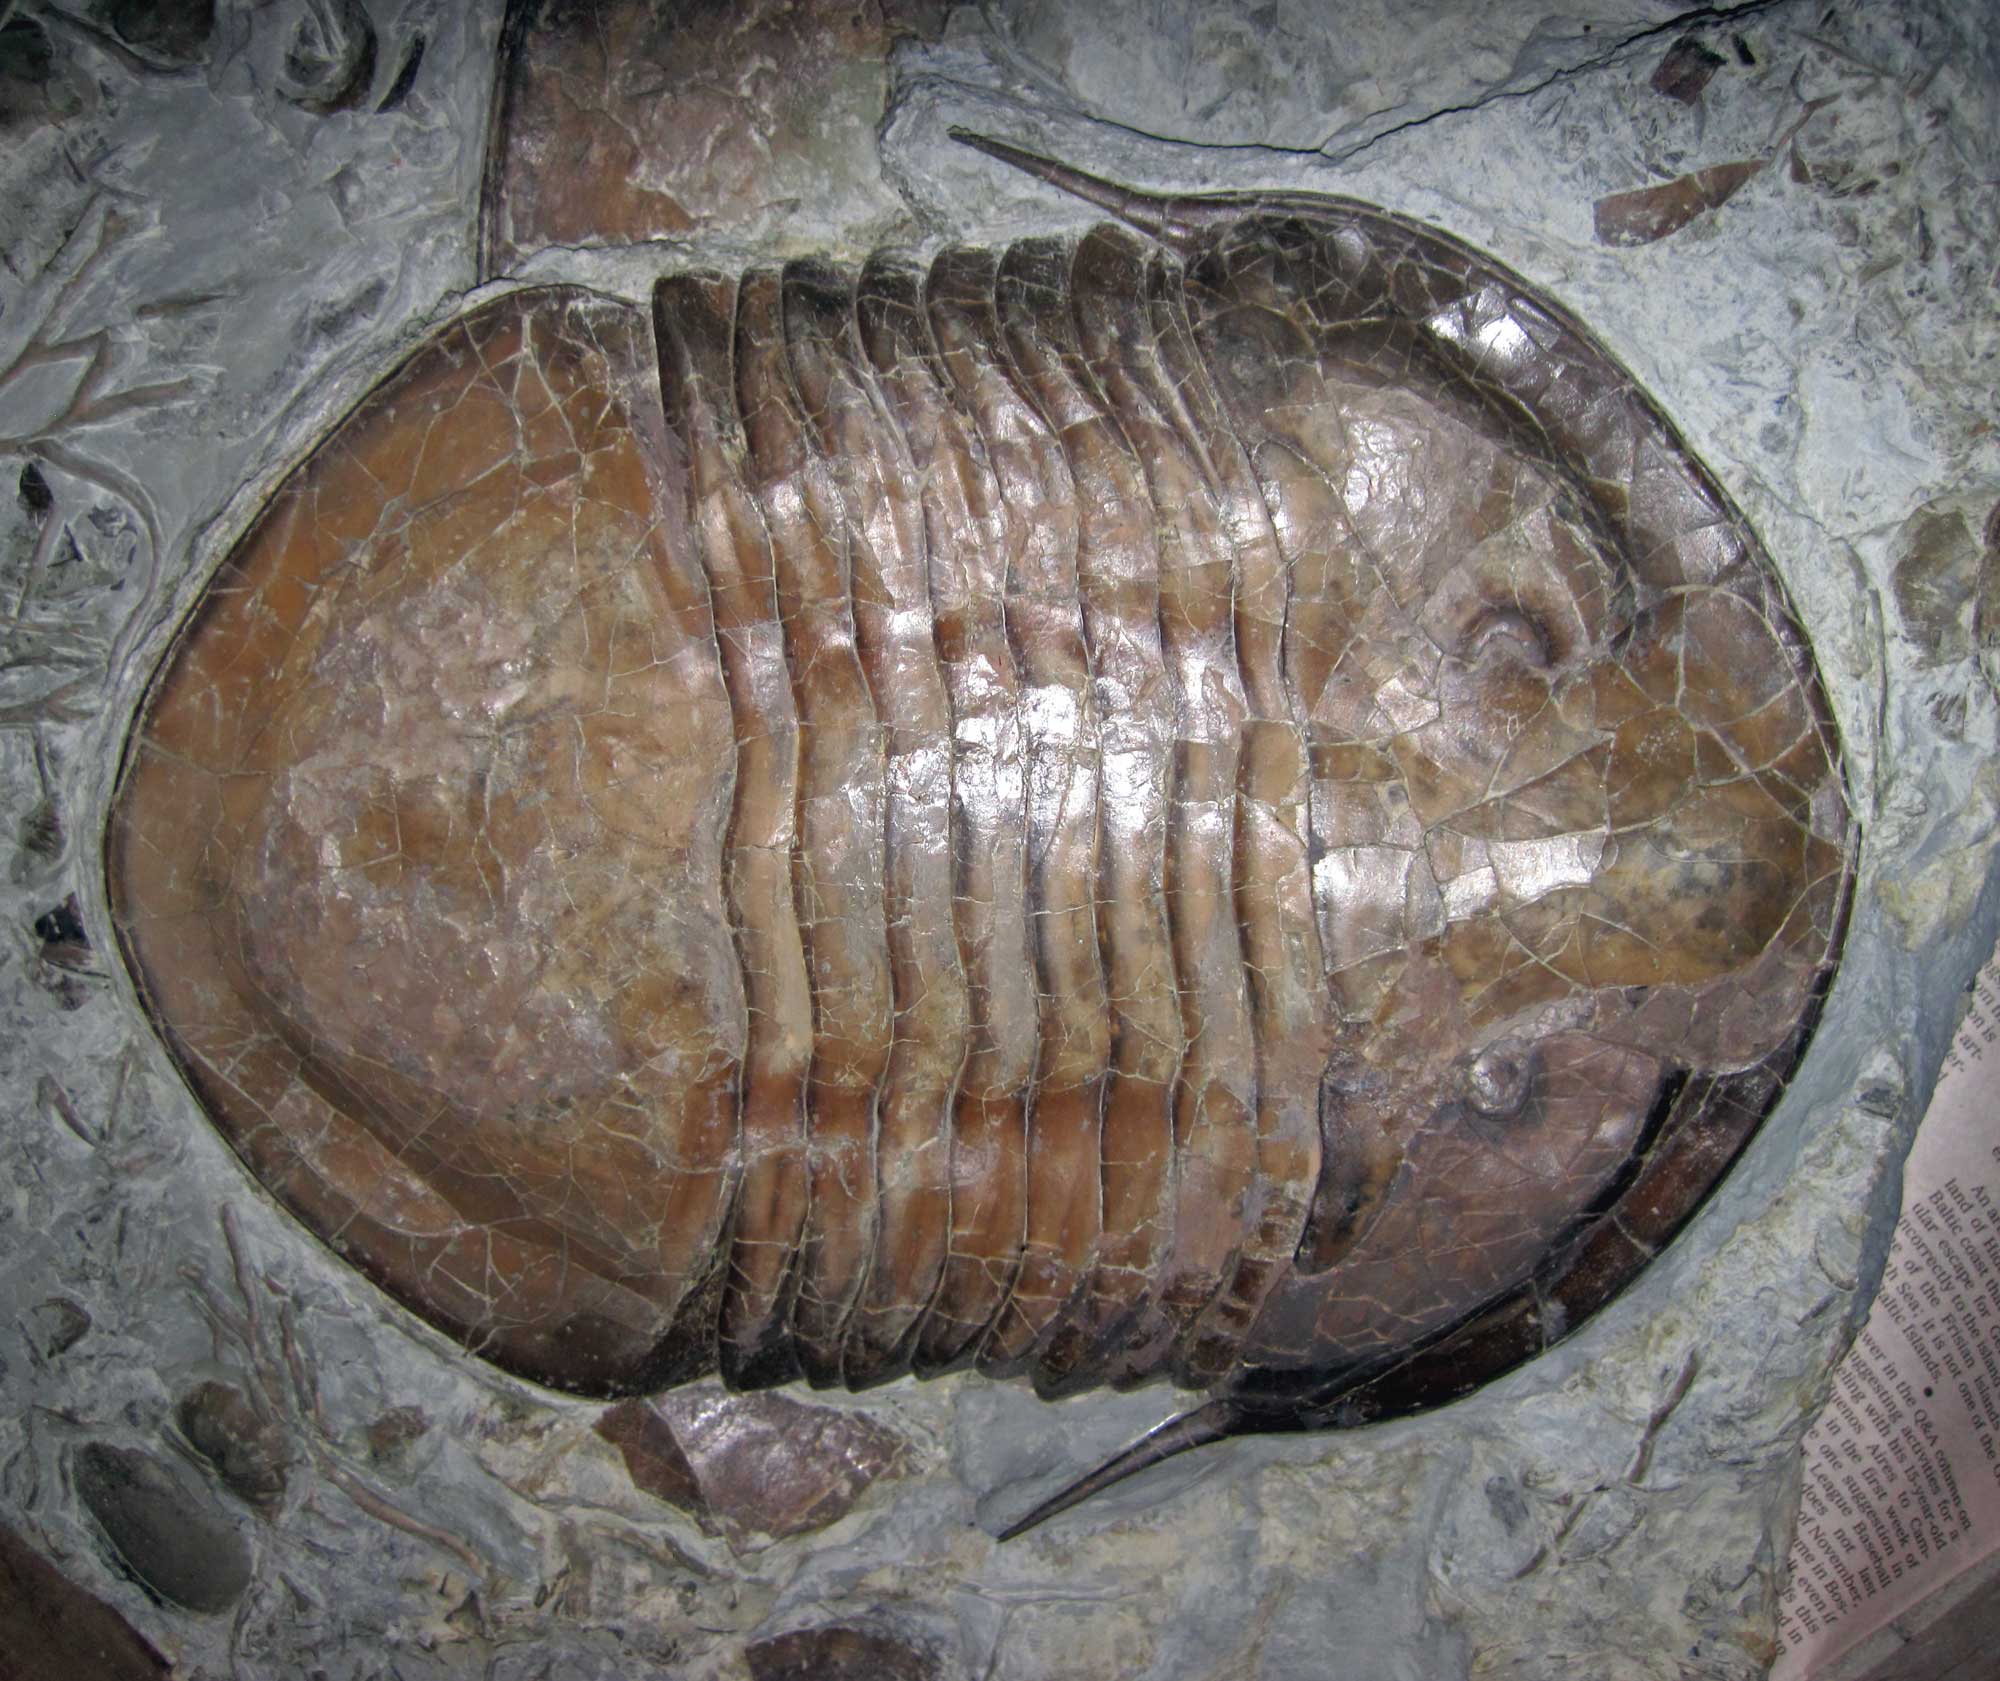 Photograph of an Isotelus maximus trilobite fossil from the Ordovician of Ohio.